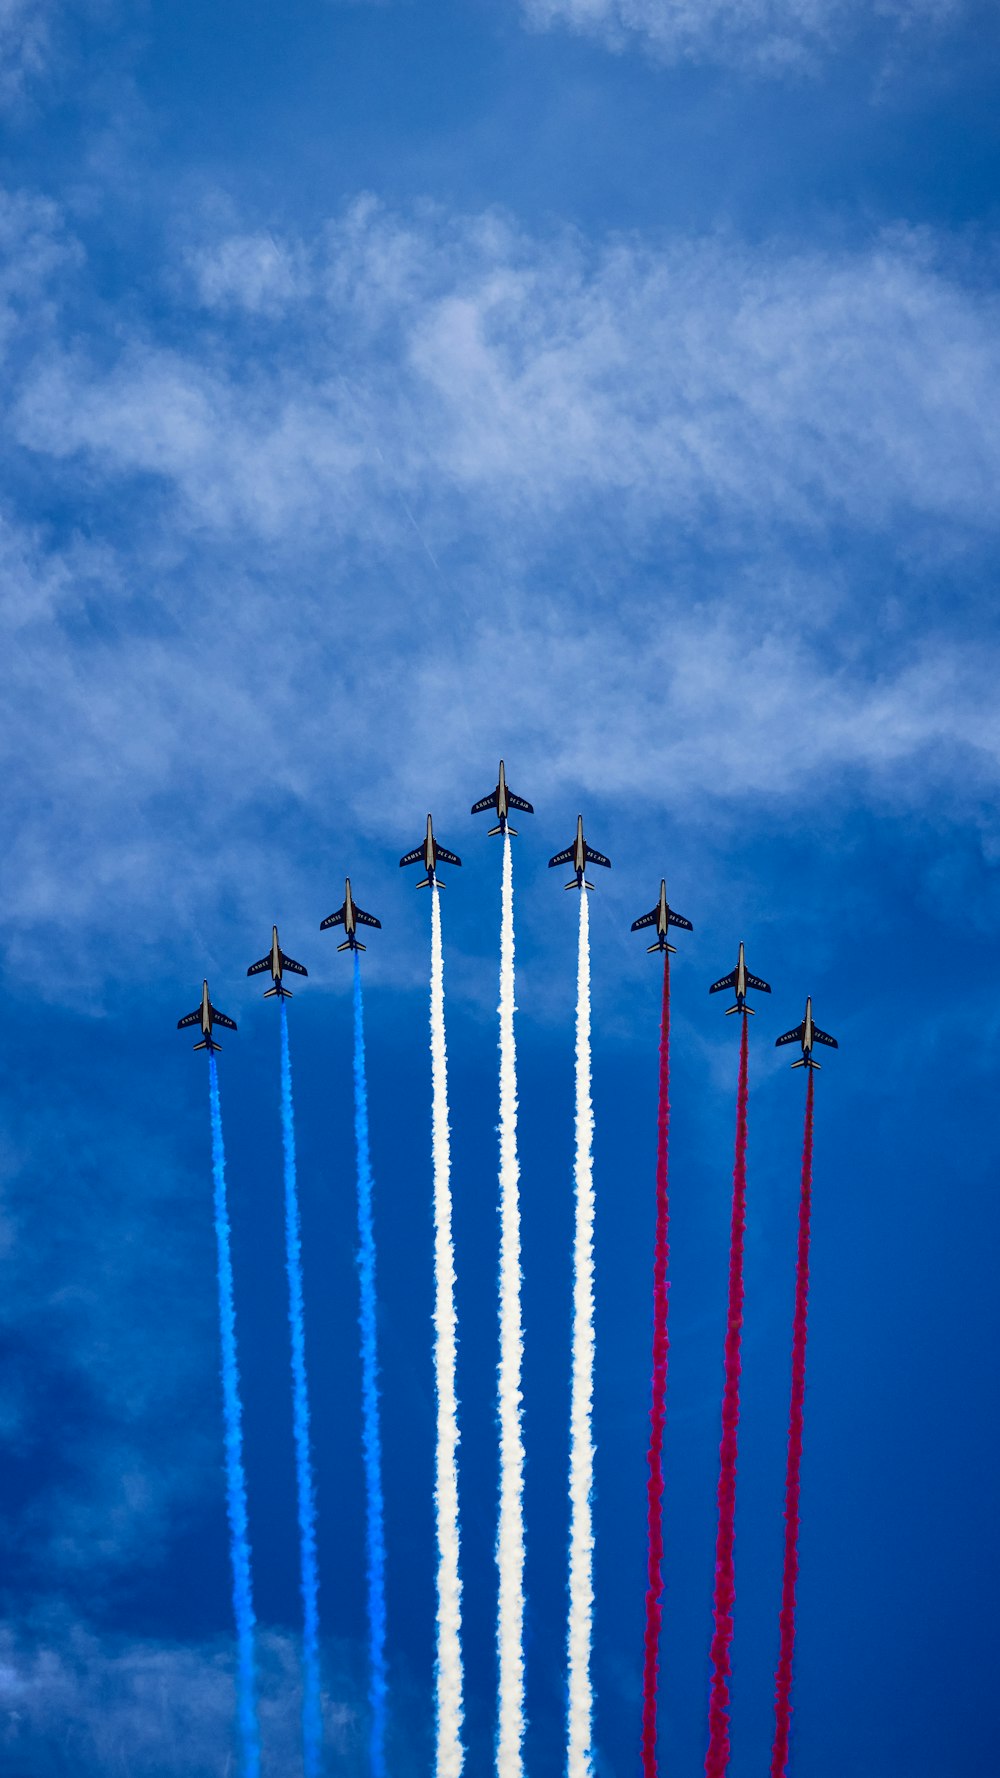 planes flying in formation